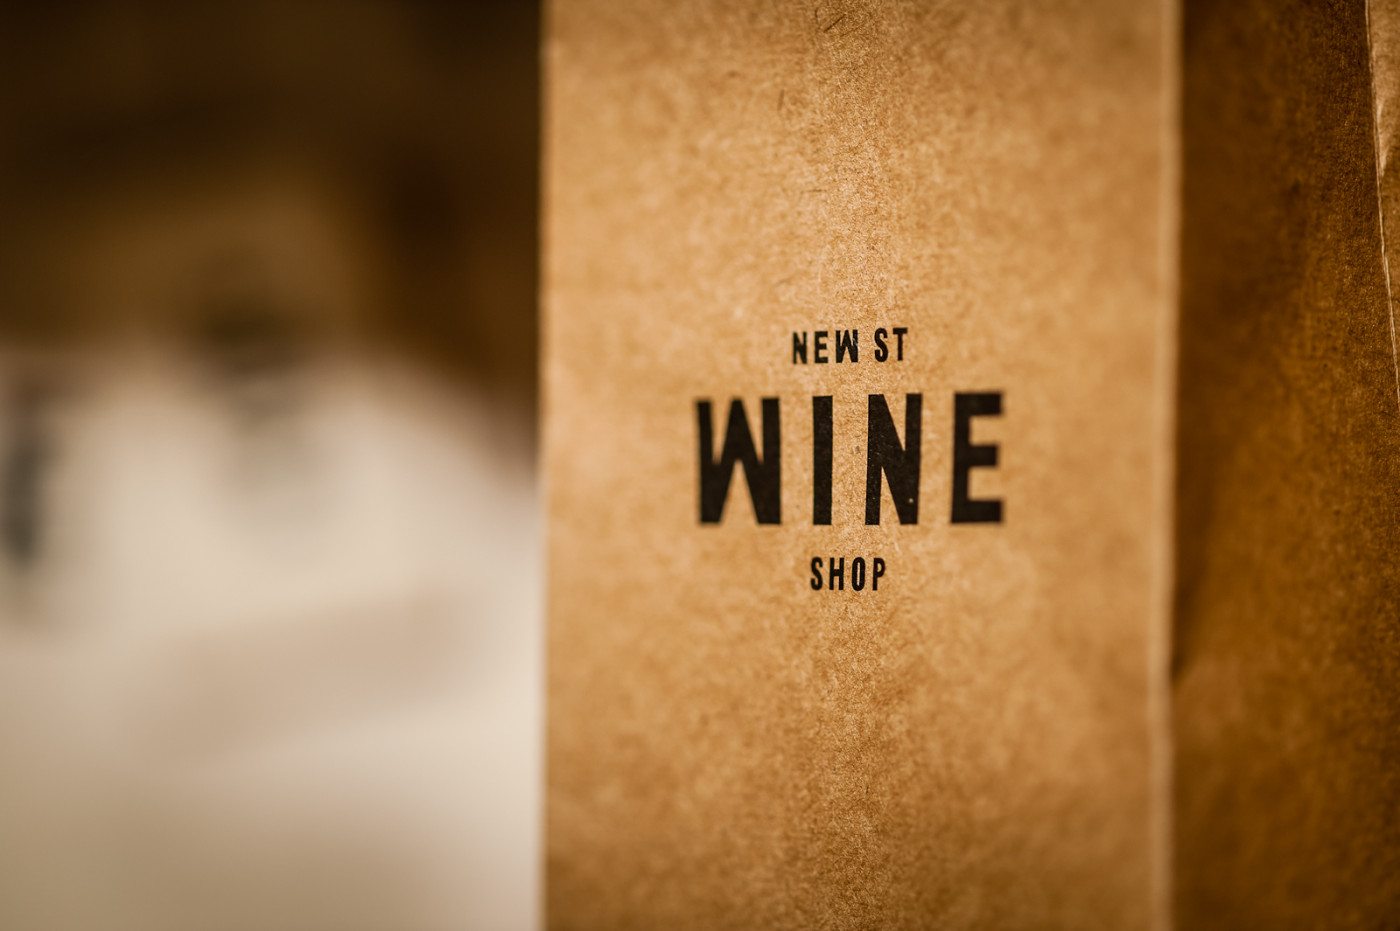 A paper bag for your wine purchase